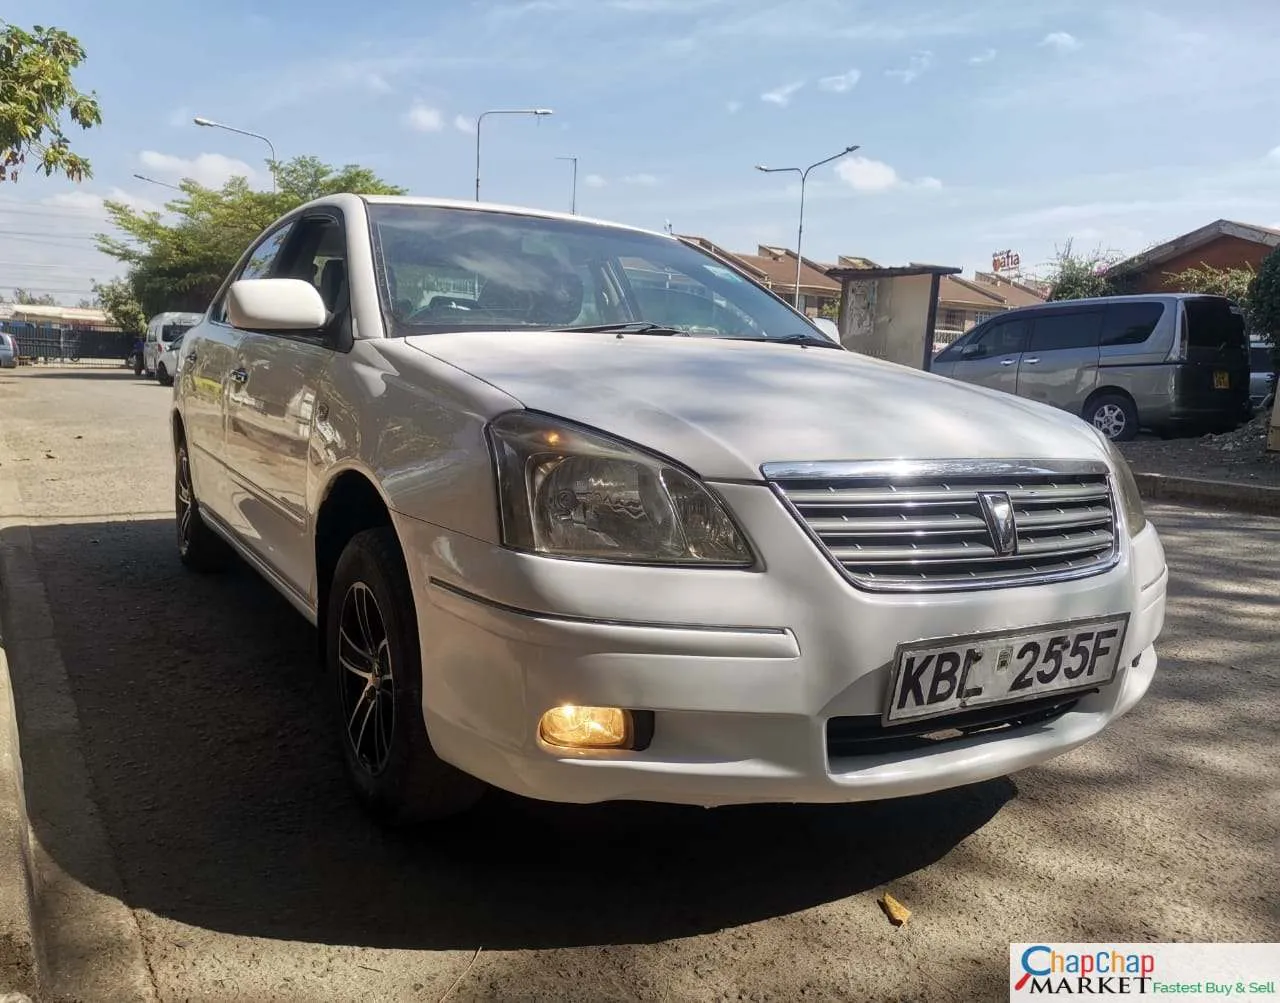 Toyota PREMIO for sale in Kenya hire purchase installments You pay 30% Deposit Trade in Ok EXCLUSIVE Toyota premio Kenya 240